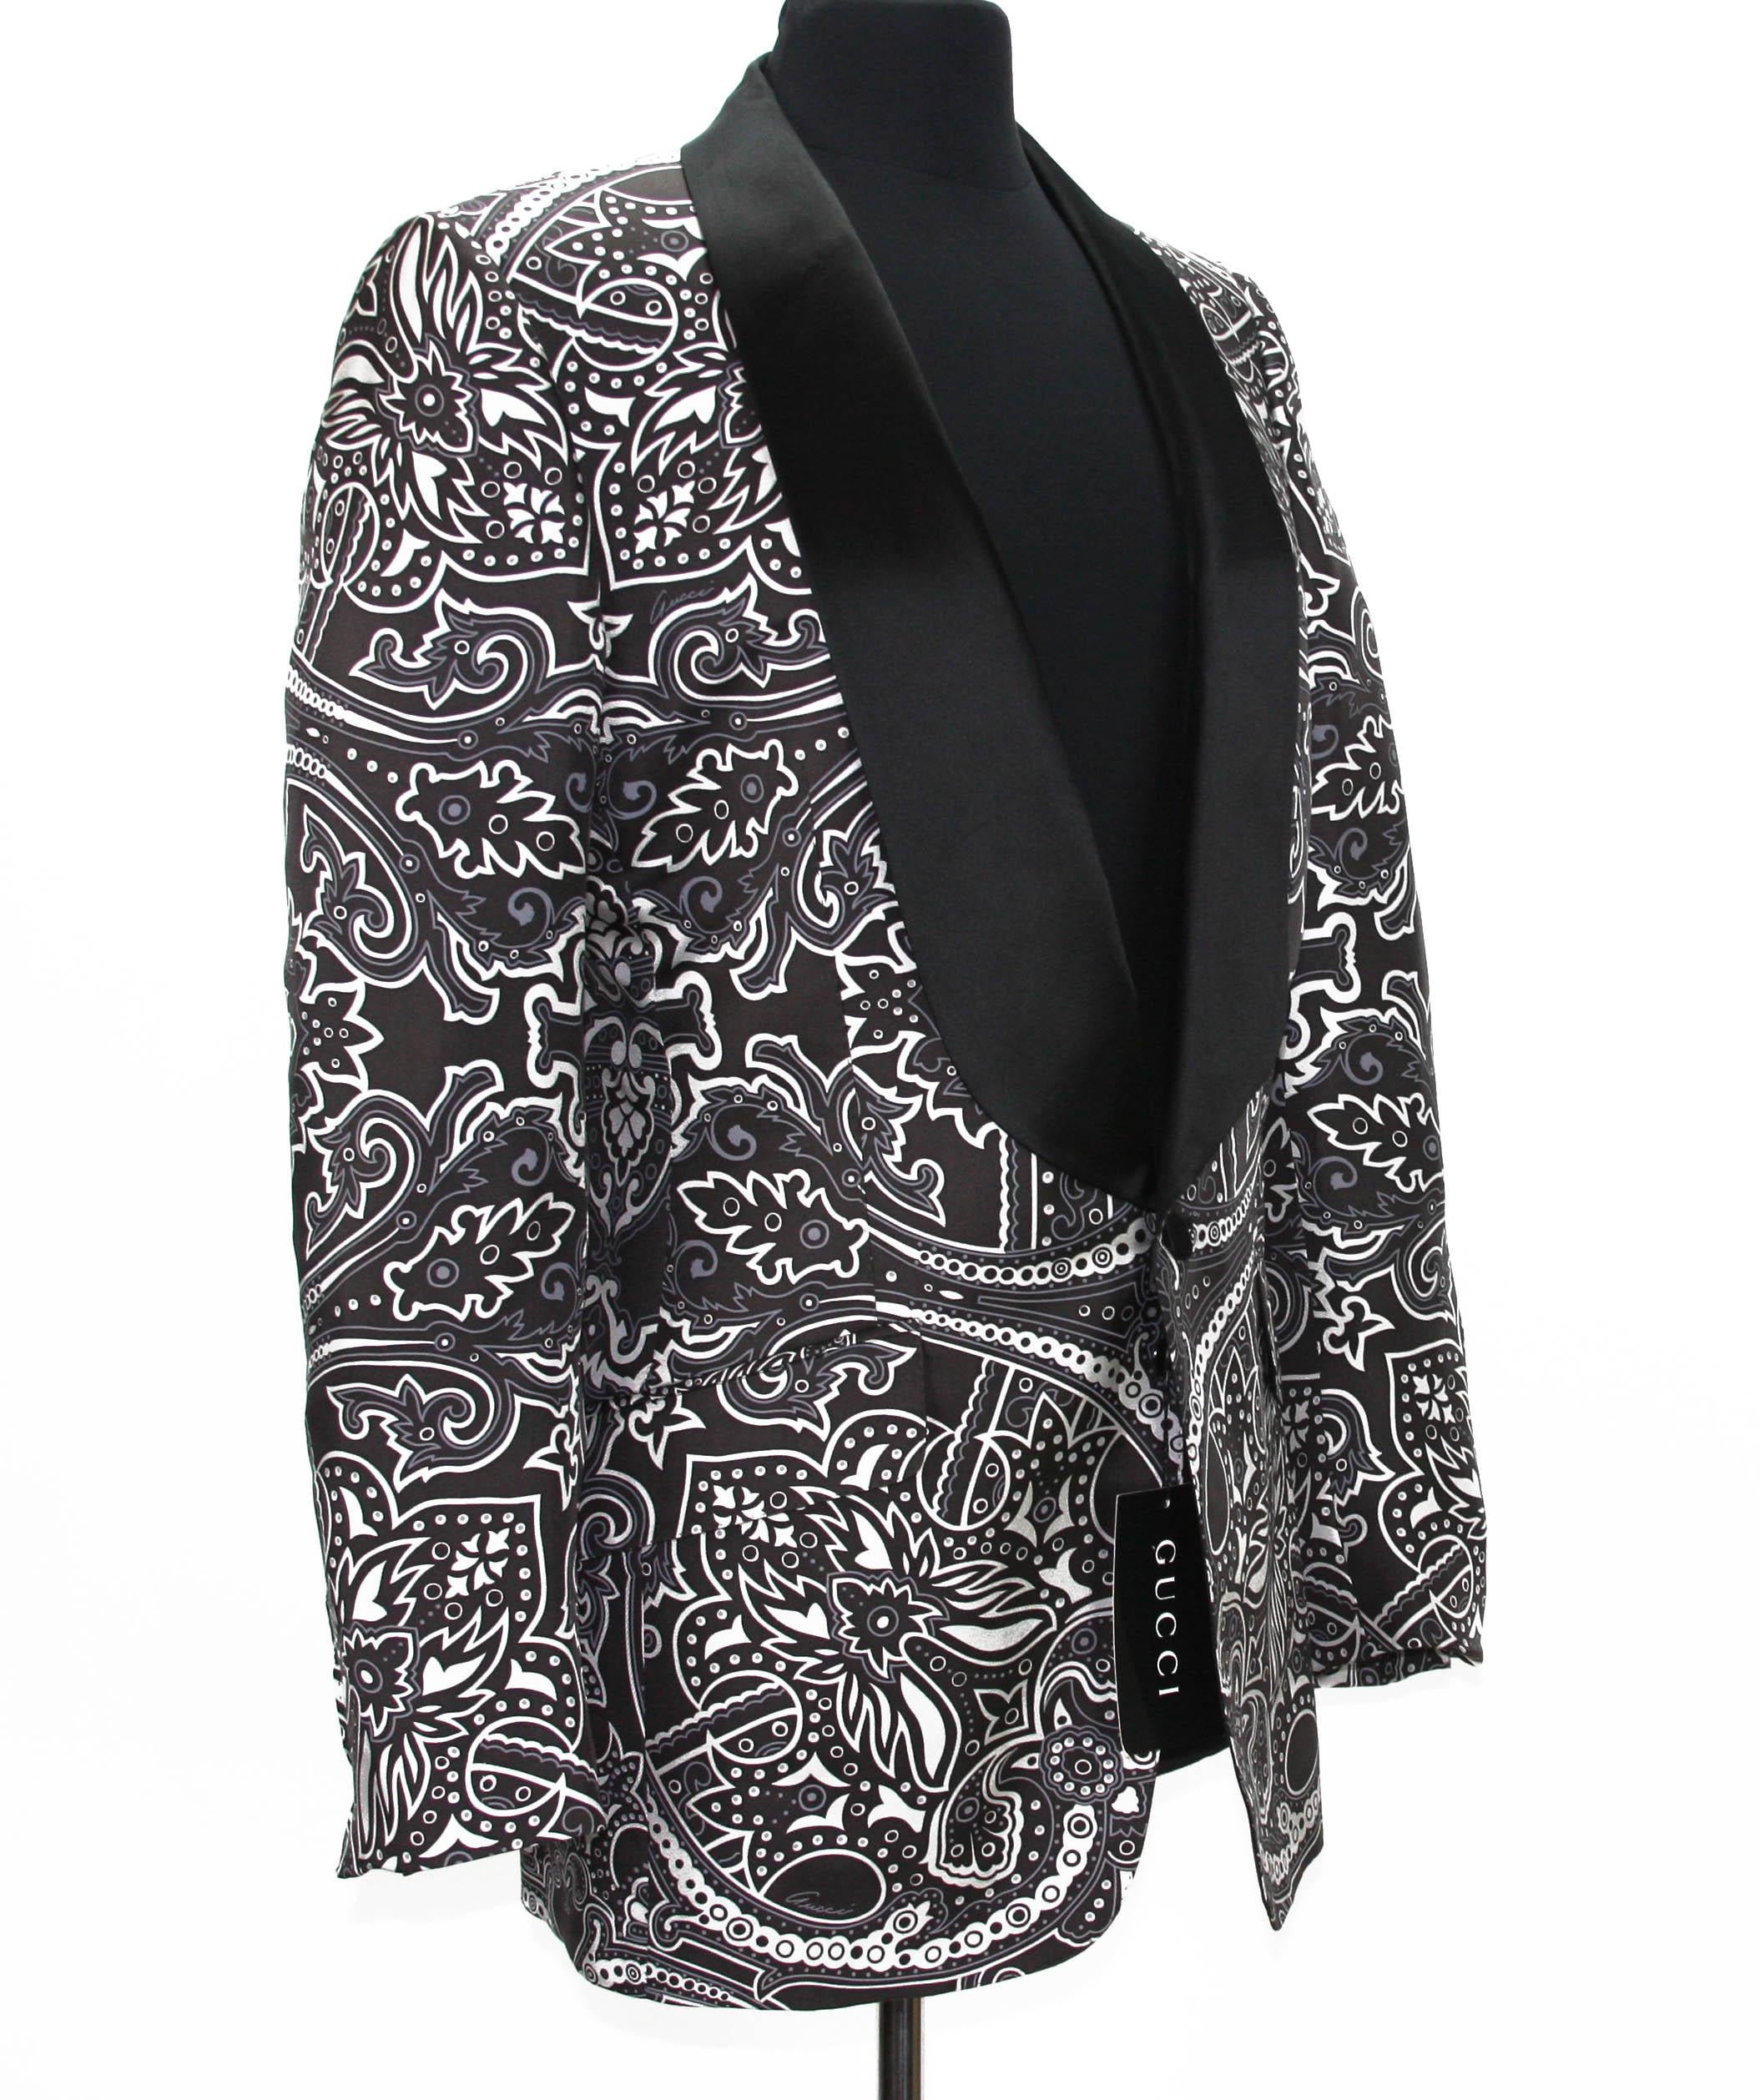 New and Rare Tom Ford for Gucci Silk Cocktail Evening Blazer Jacket
Spring / Summer 2004 Runway Collection
Designer size 46 R - US 36 R
100% Silk, Brow,White and Gray Colors, Black Shawl Lapel, Single Button Closure.
Chest Pocket, Two Flap Pockets,